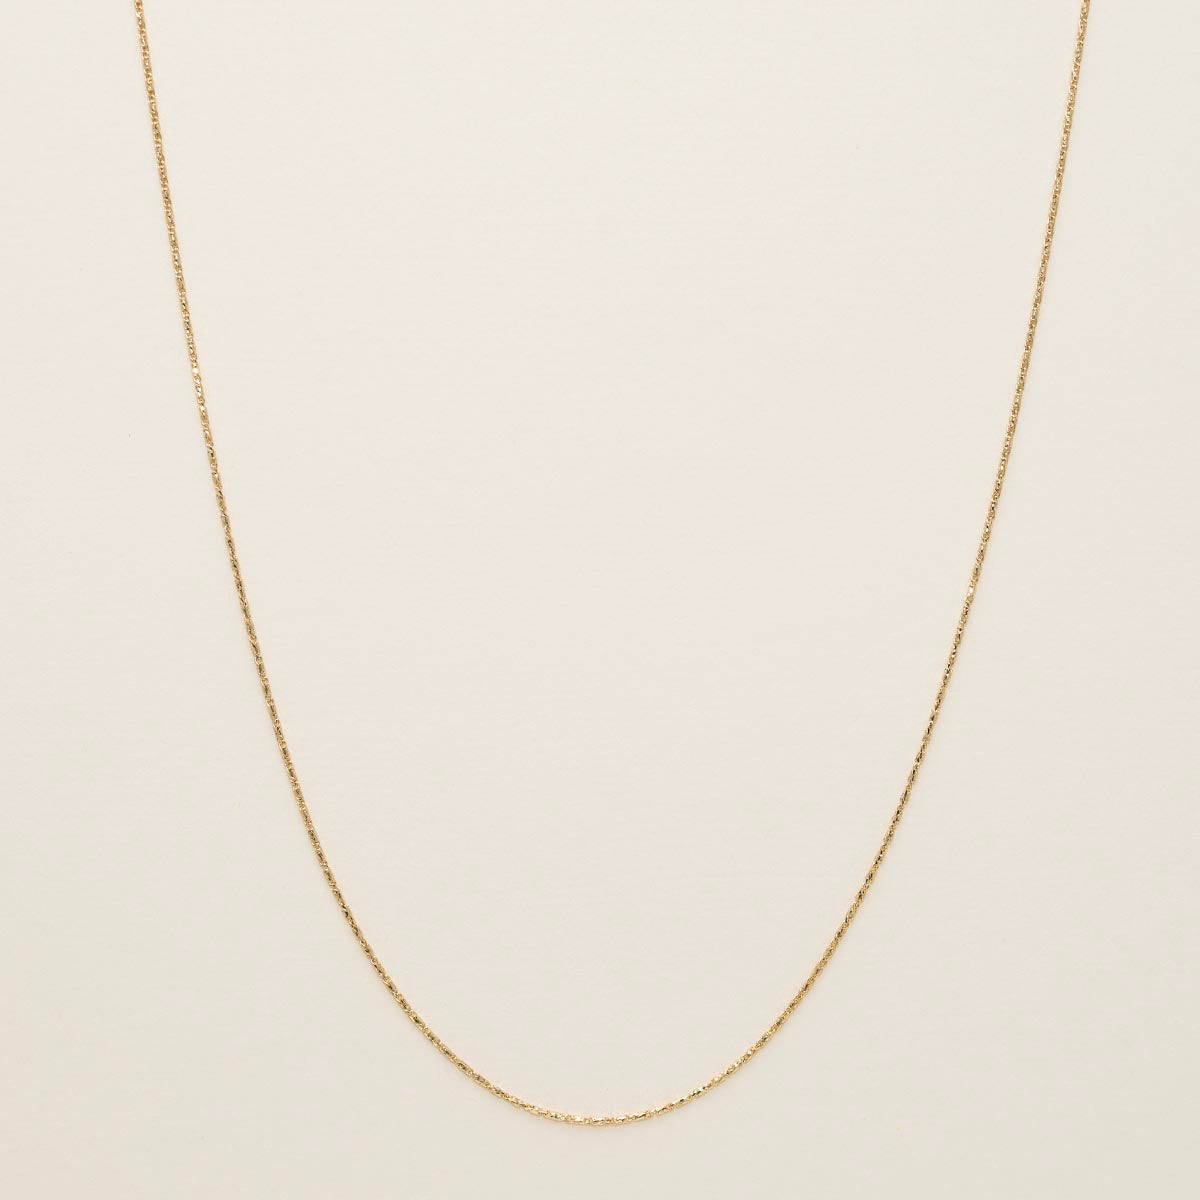 Raso Chain in 14kt Yellow Gold (18 inches and 1mm wide)